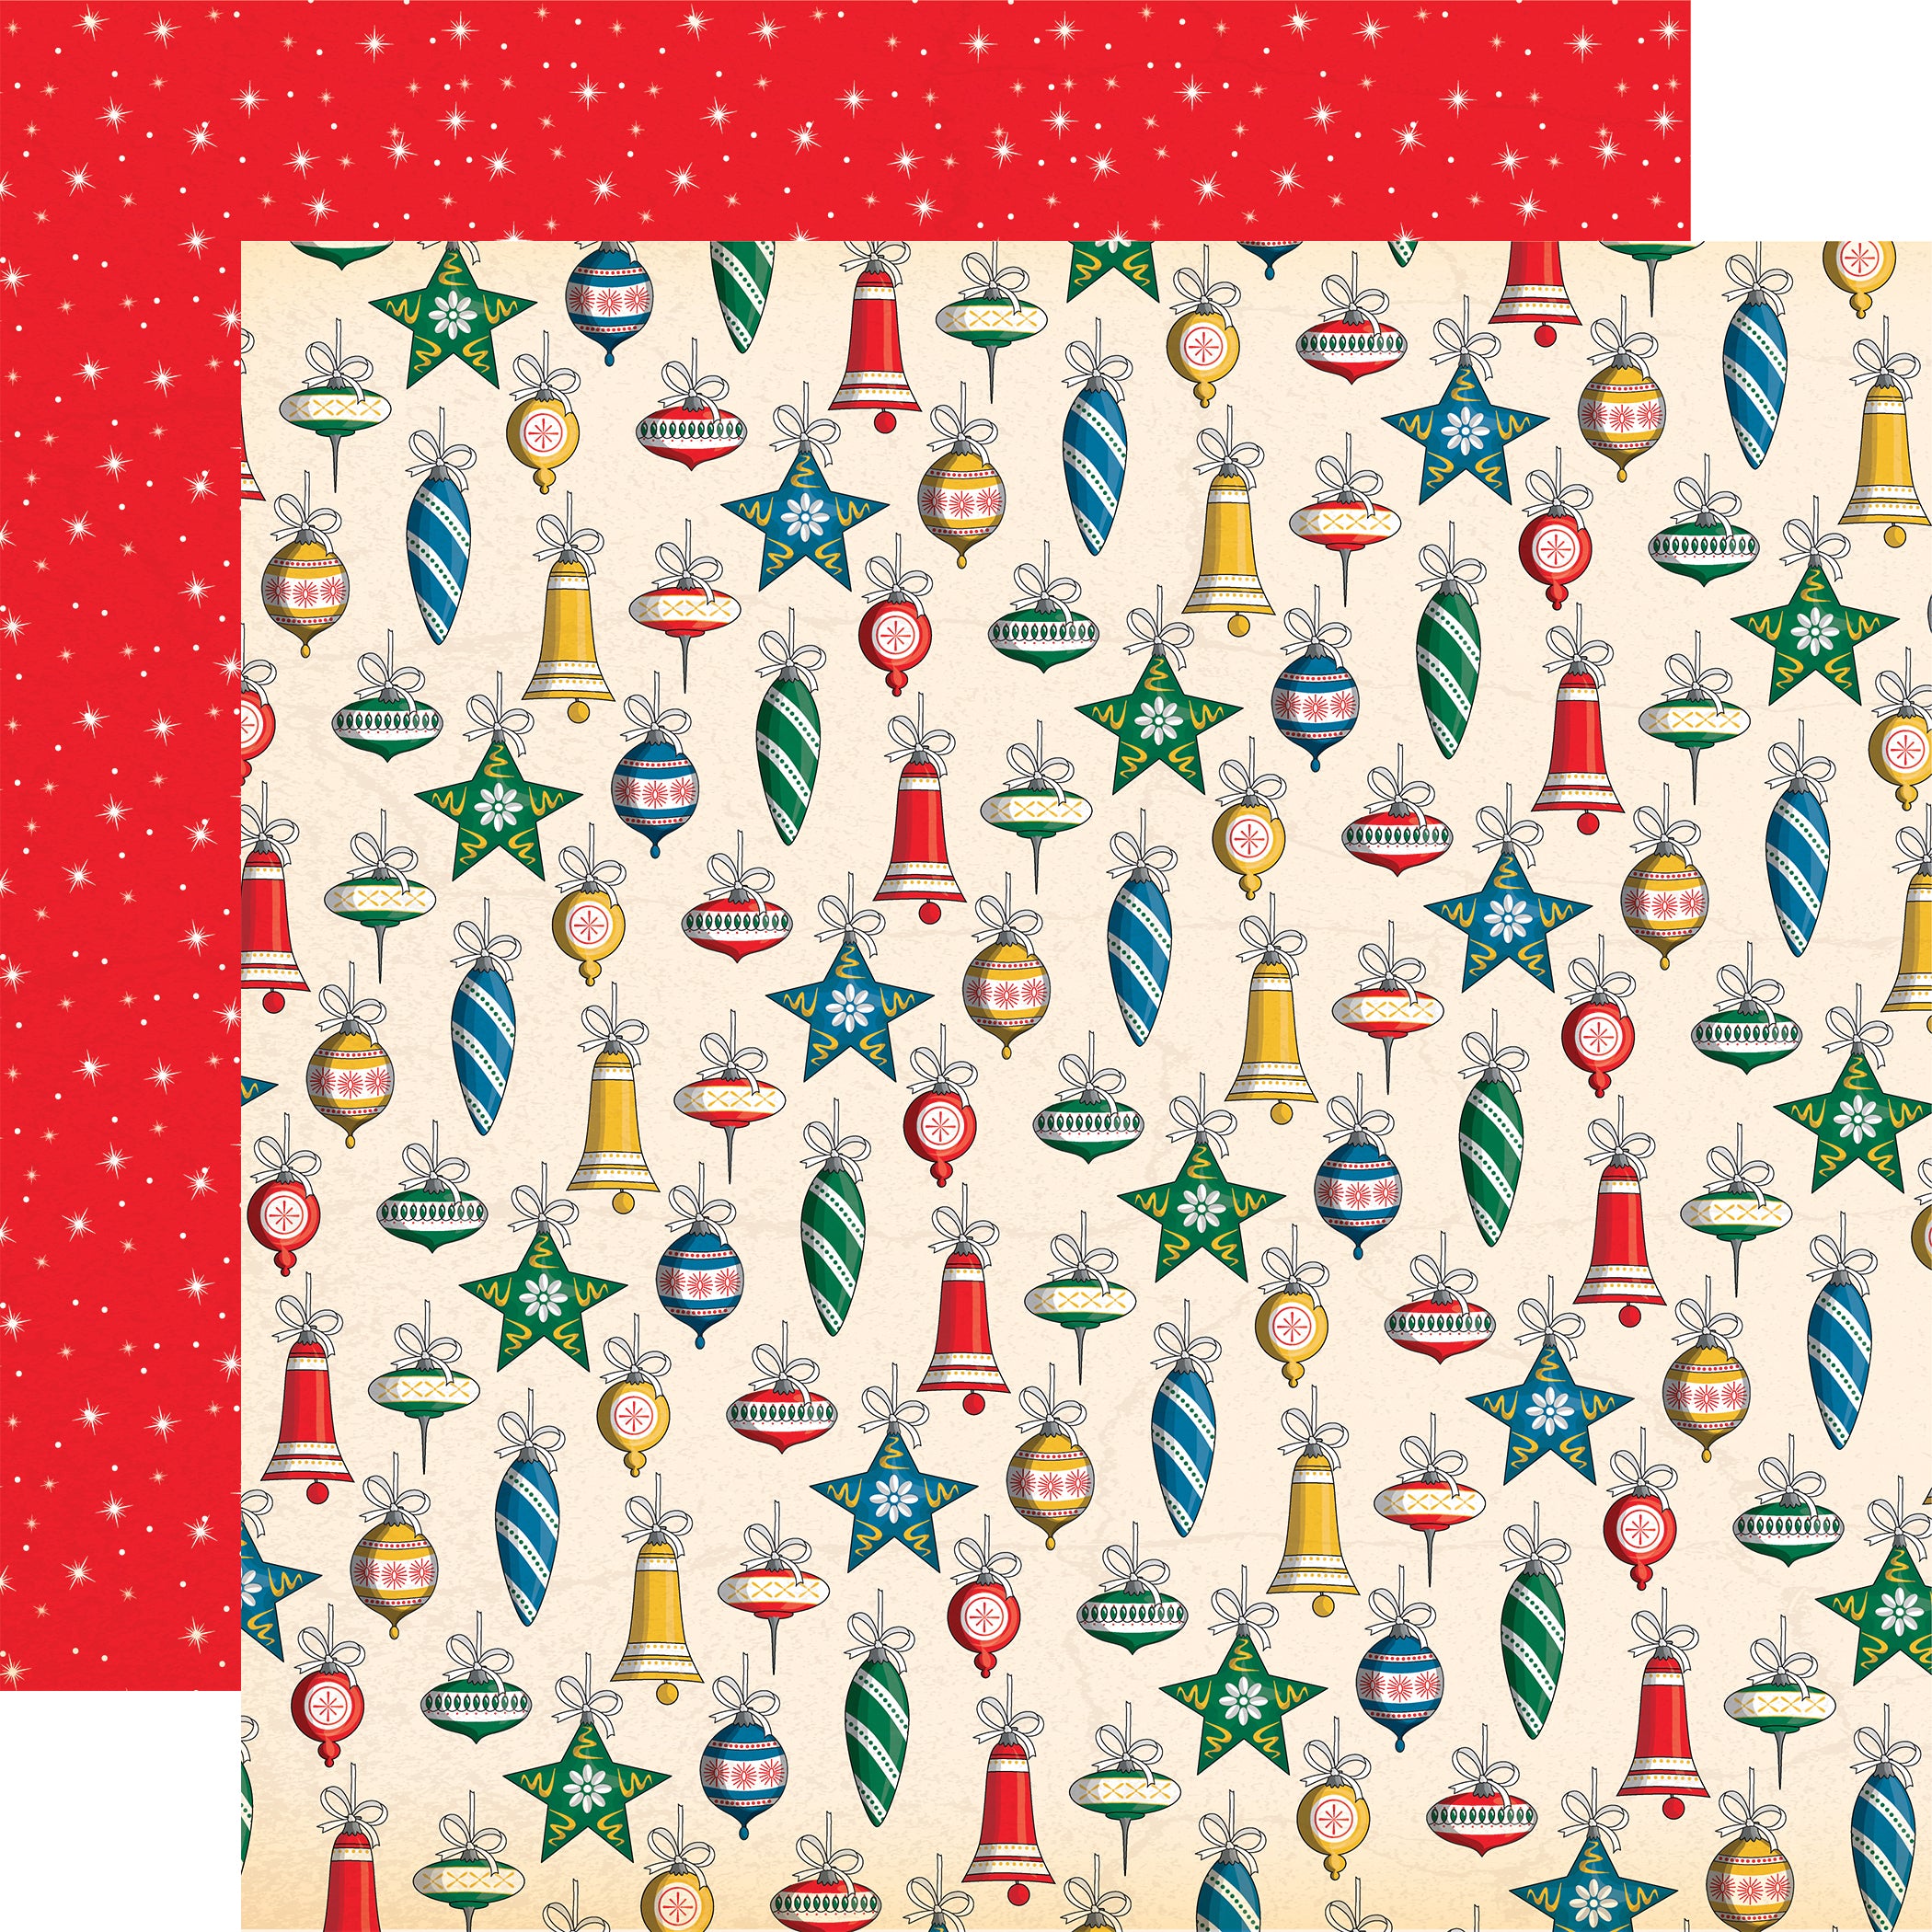 Season's Greetings Collection Holiday Ornaments 12 x 12 Double-Sided Scrapbook Paper by Carta Bella